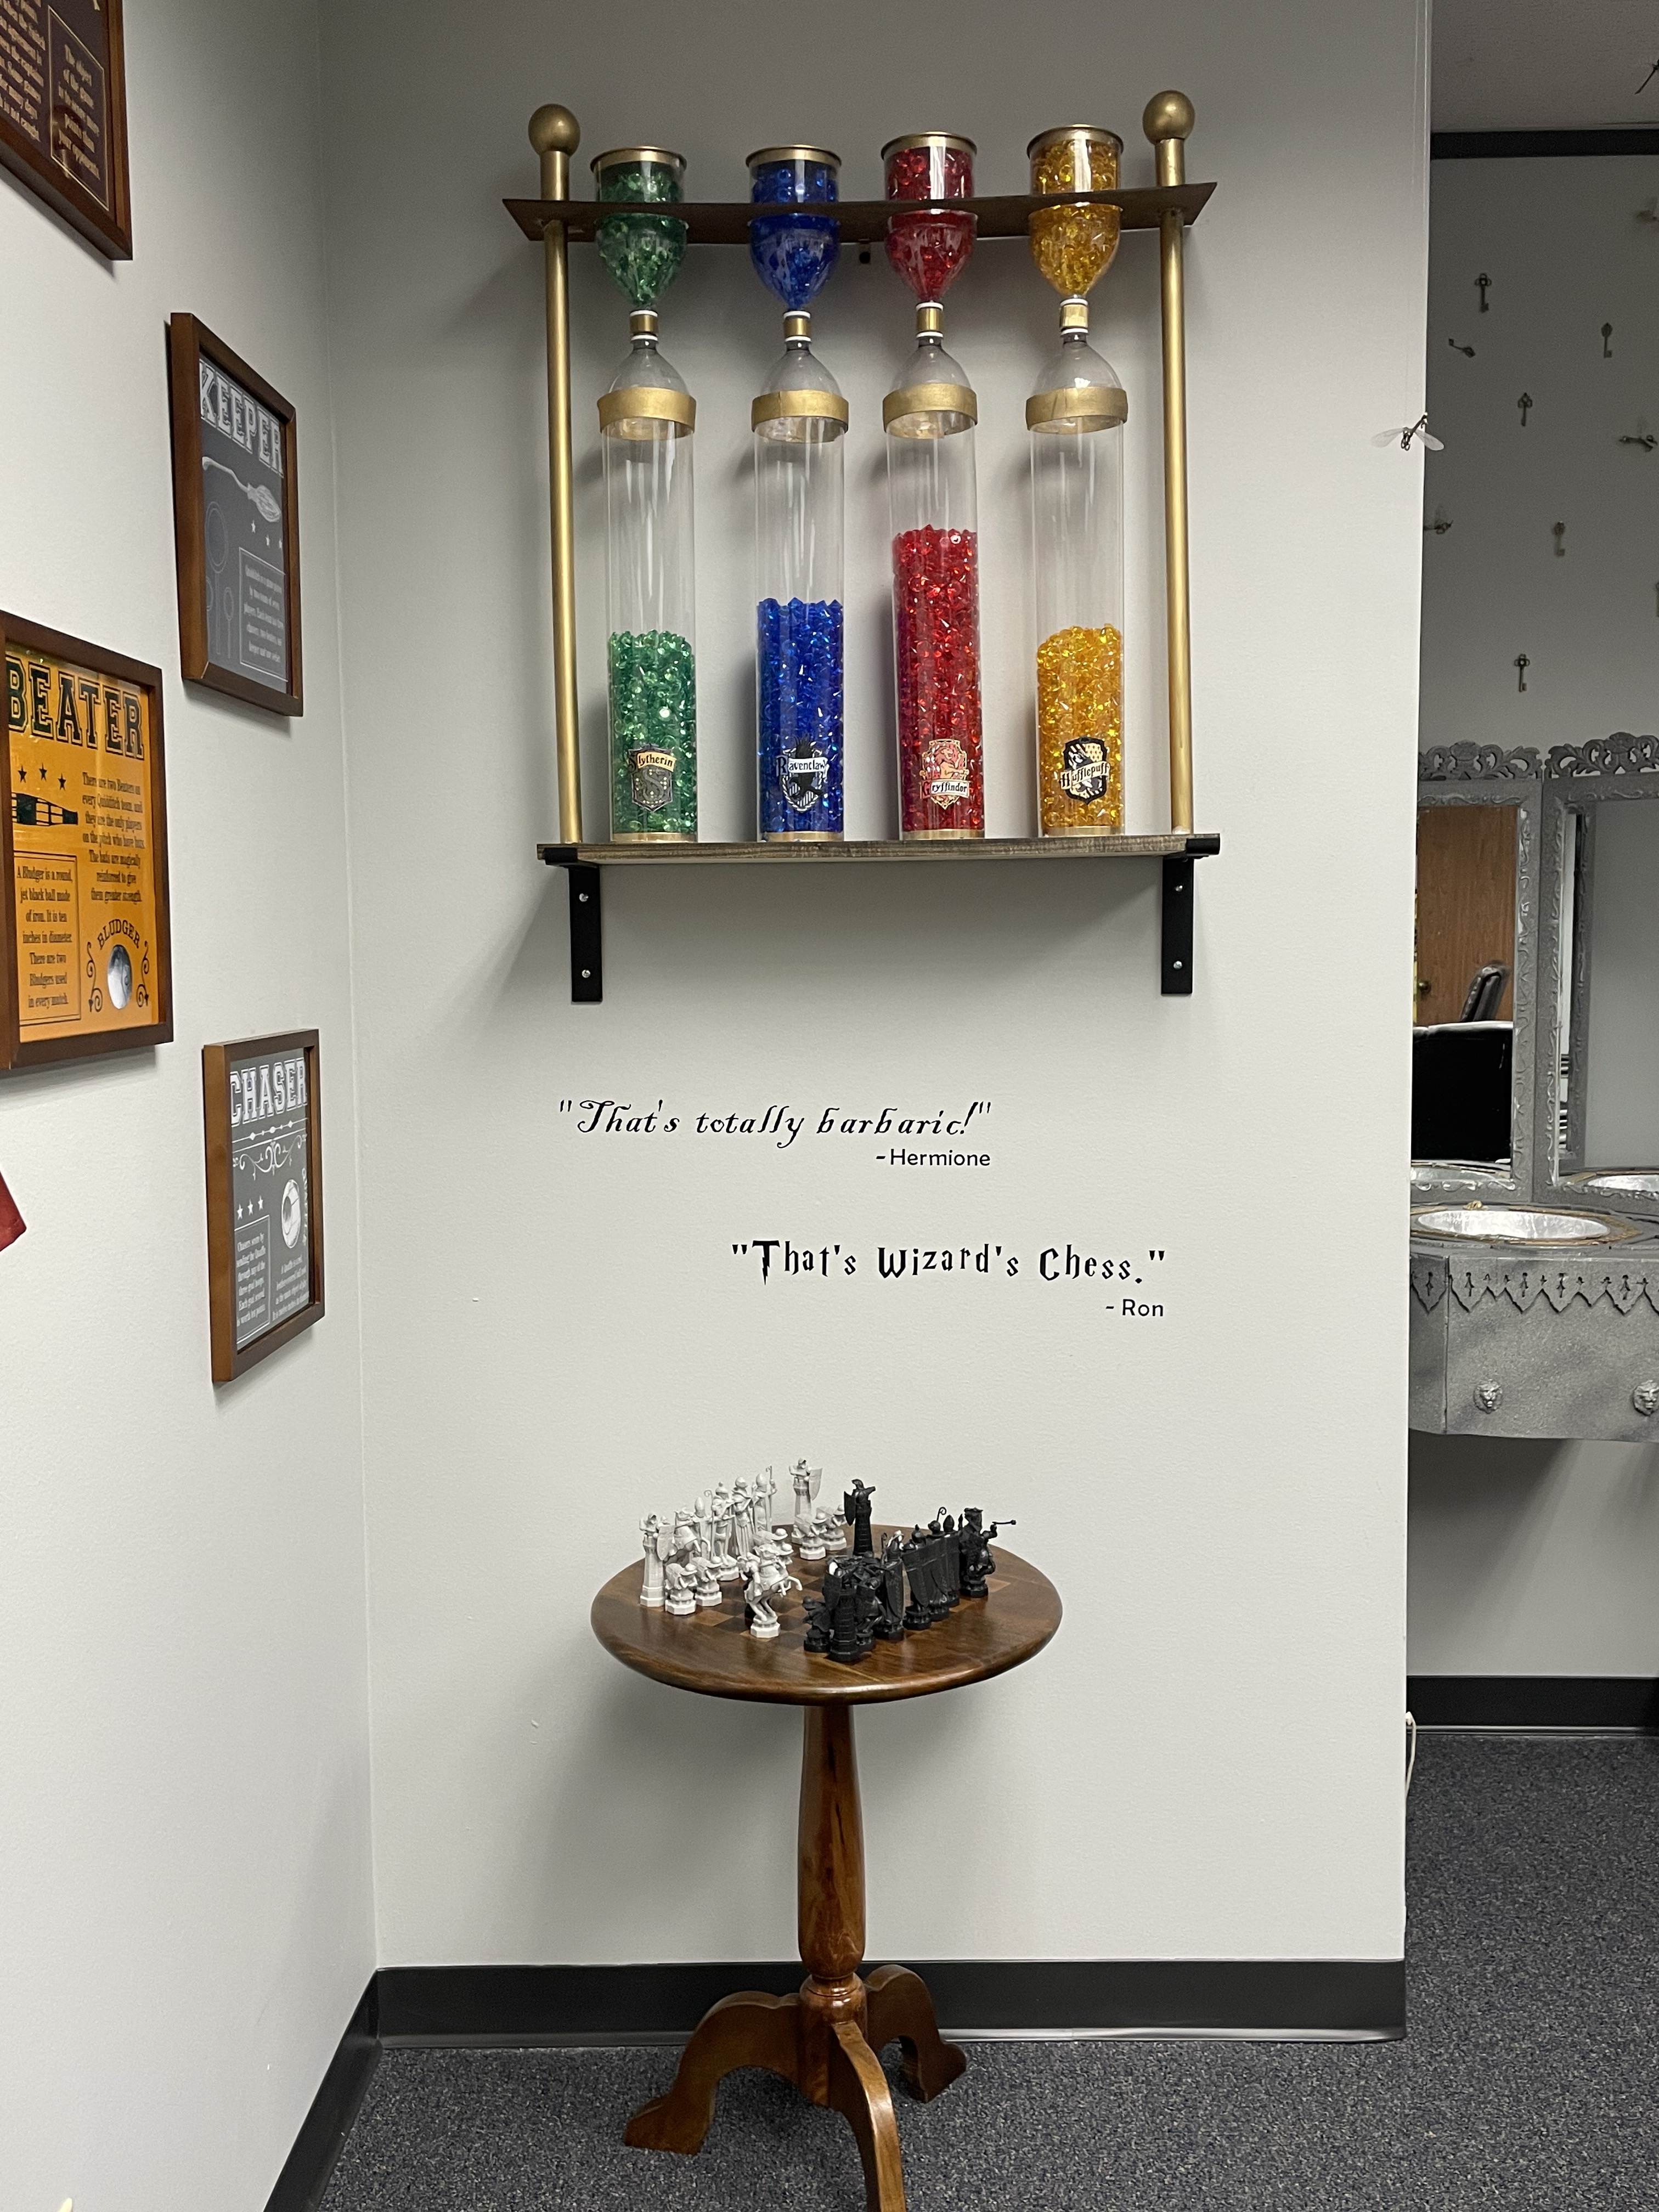 Harry Potter themed conference room added to our already non